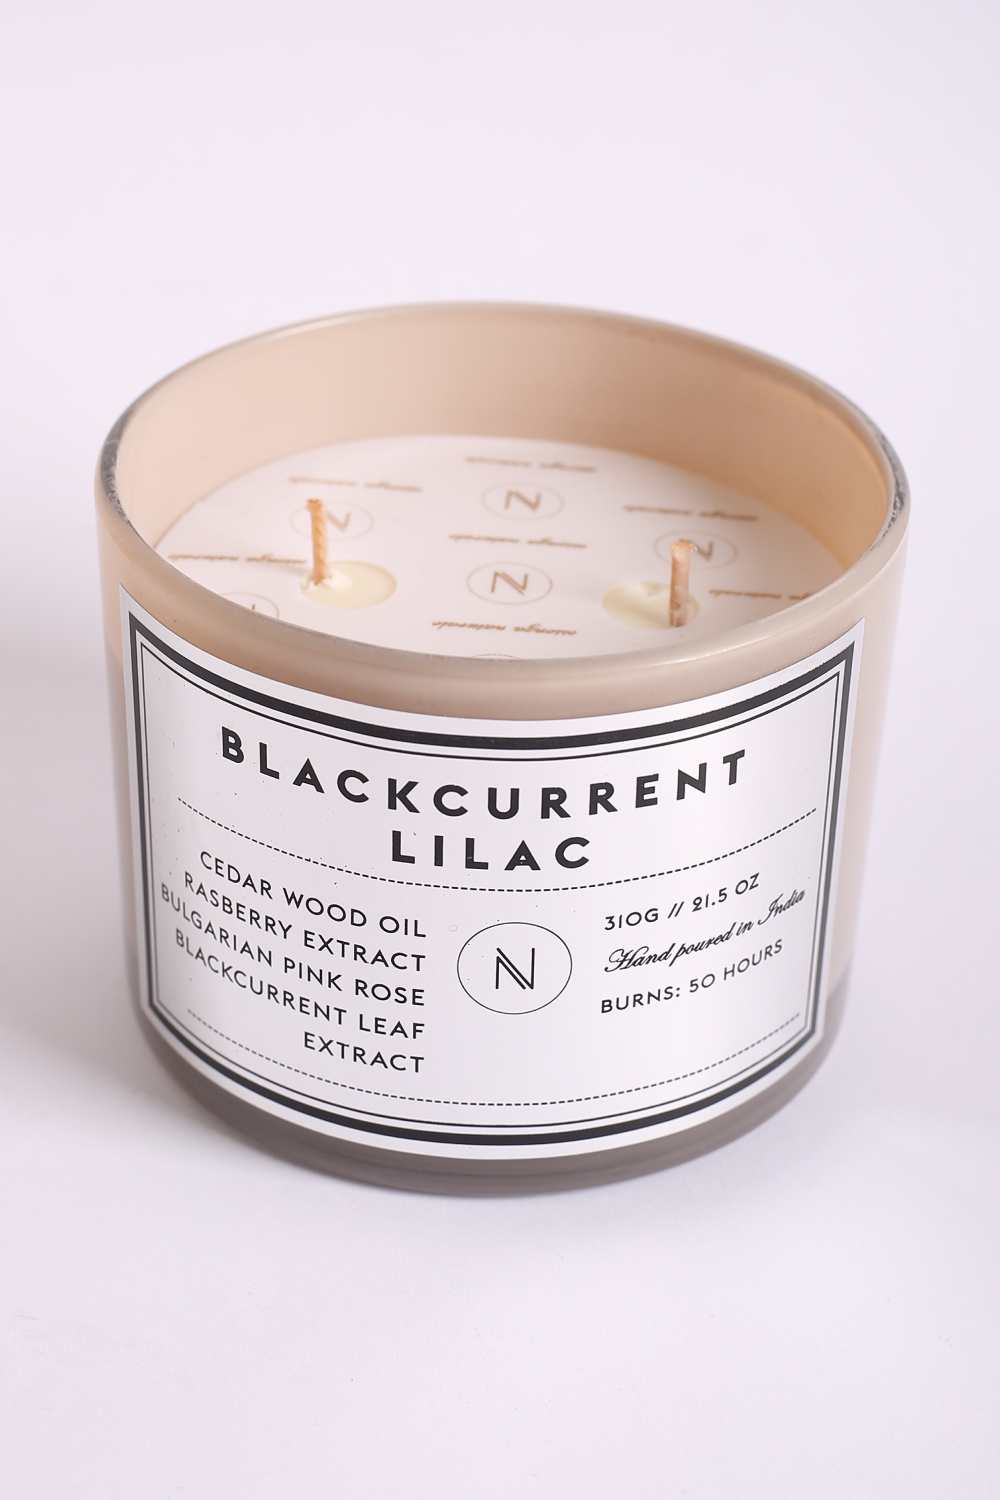 Blackcurrant infused in Lilac (Candle) -310g